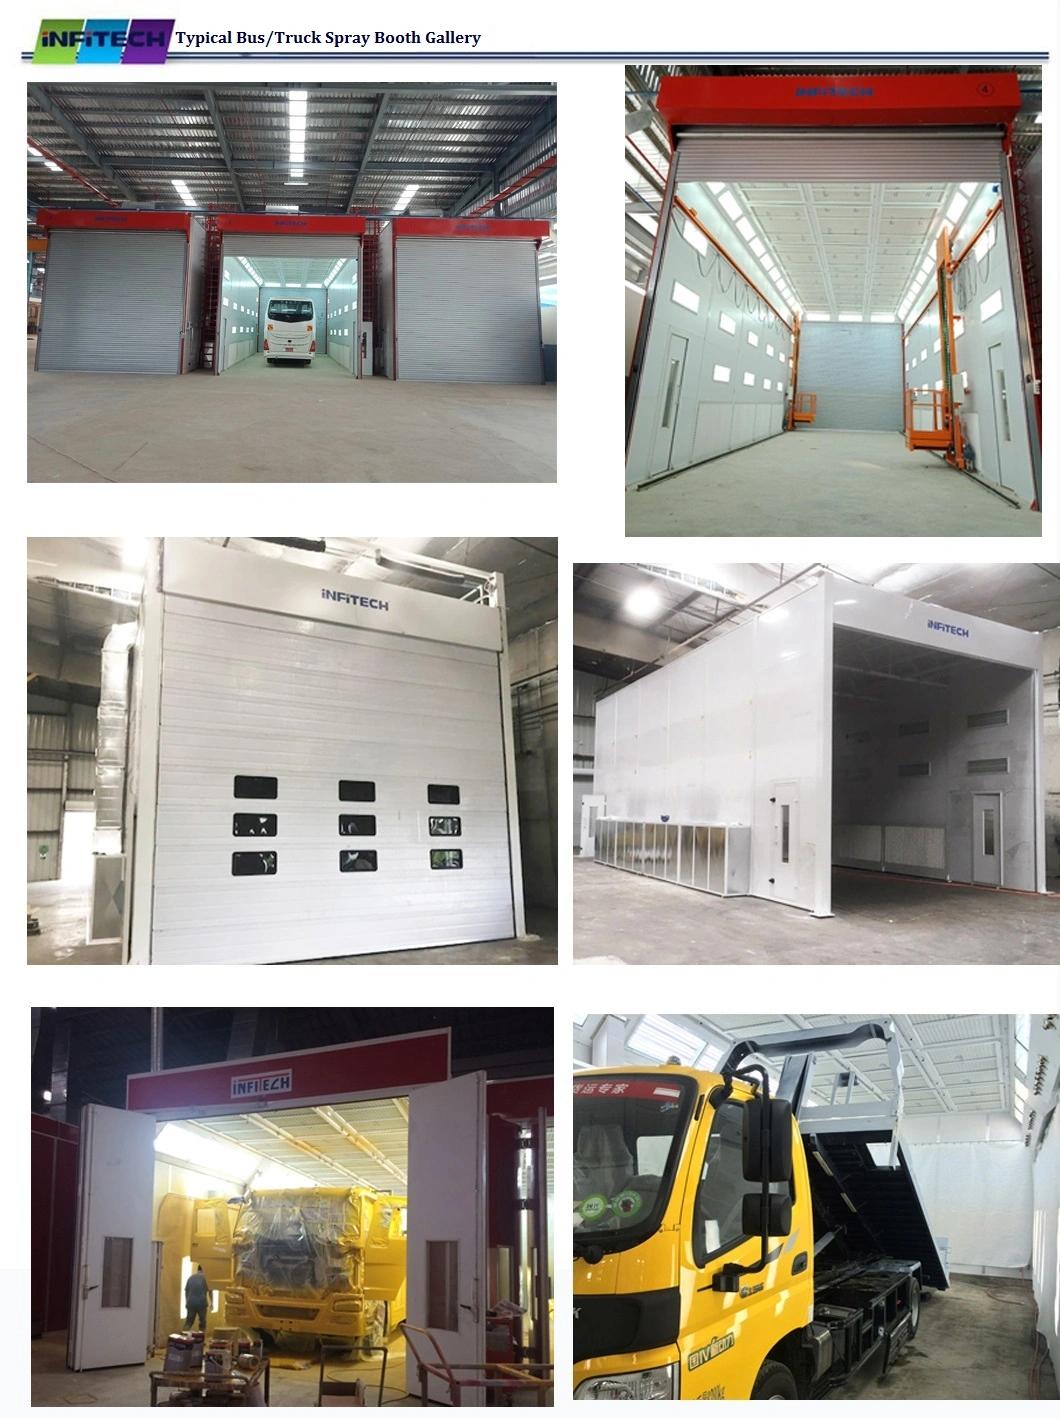 Australian Standard Large Size Industrial Painting Room with Two Working Zones